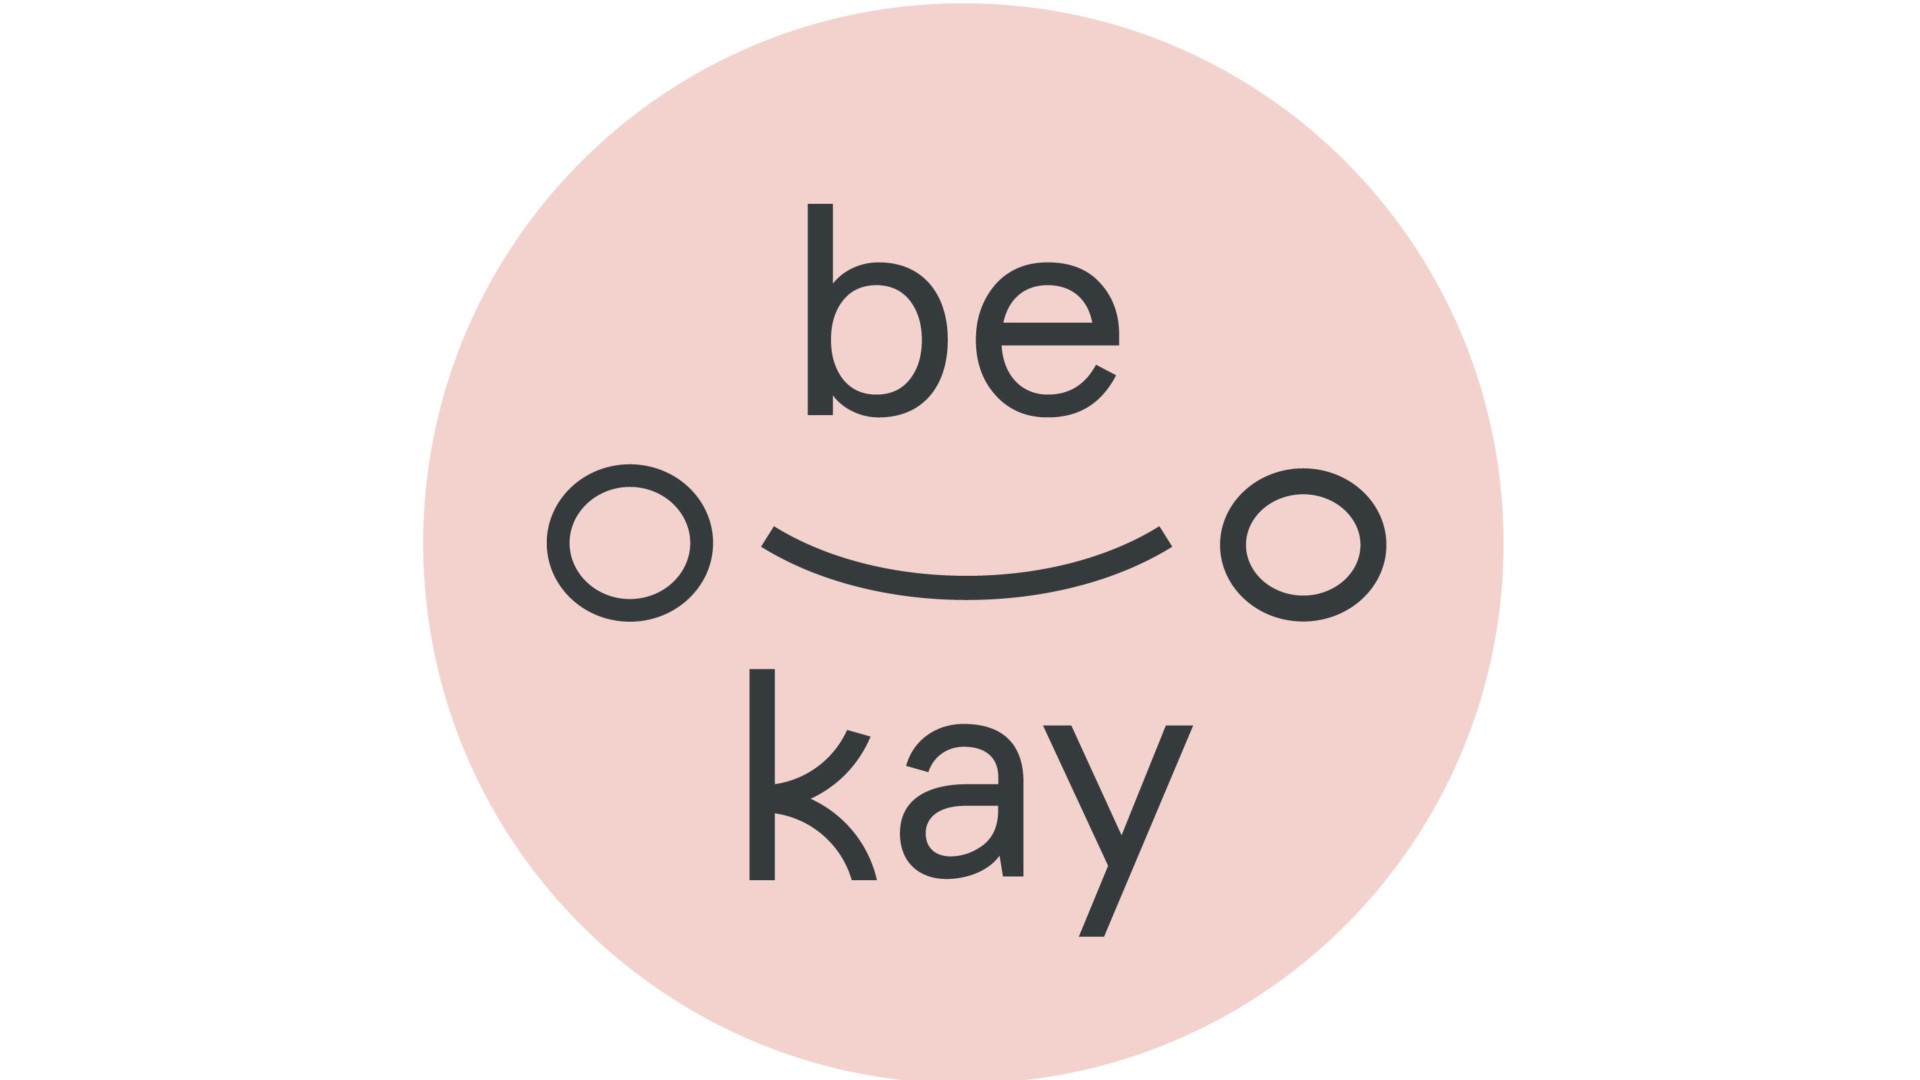 be-oo-kay-logo-color